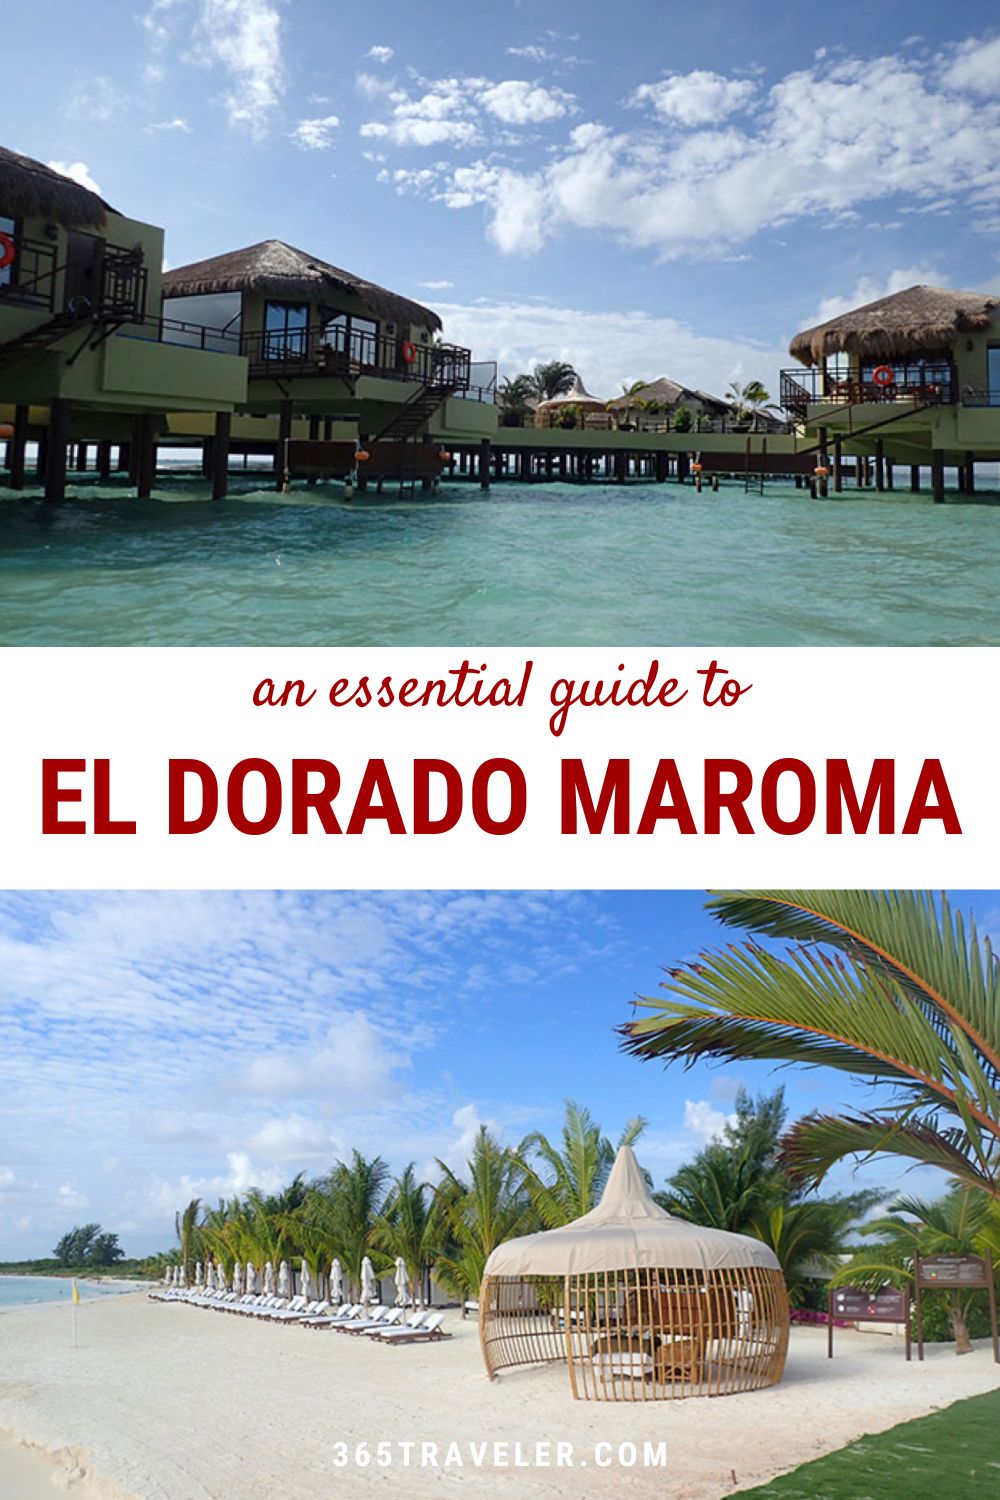 EL DORADO MAROMA: YOU'LL LOVE THESE DREAMY OVERWATER BUNGALOWS IN MEXICO